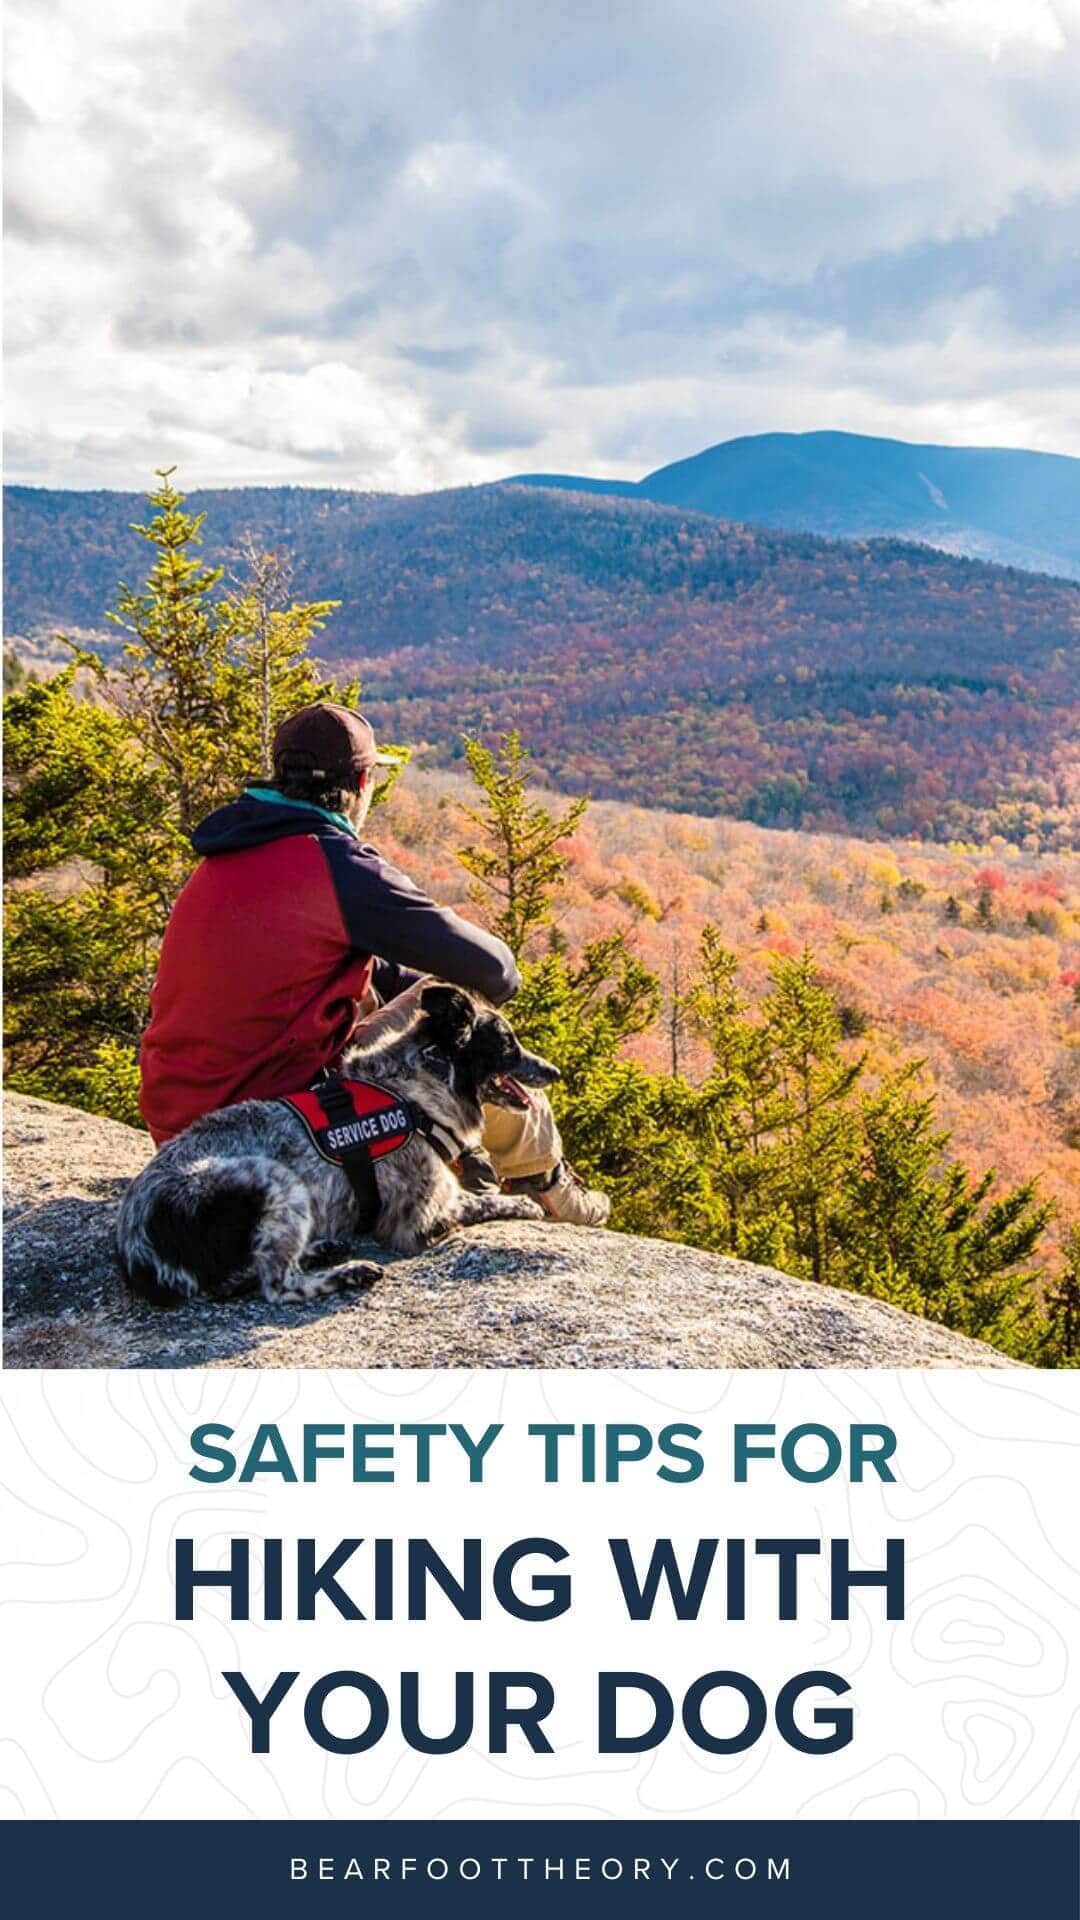 Learn the best safety tips for hiking with a dog so that you can make the most of your day on the trail with your furry friend.